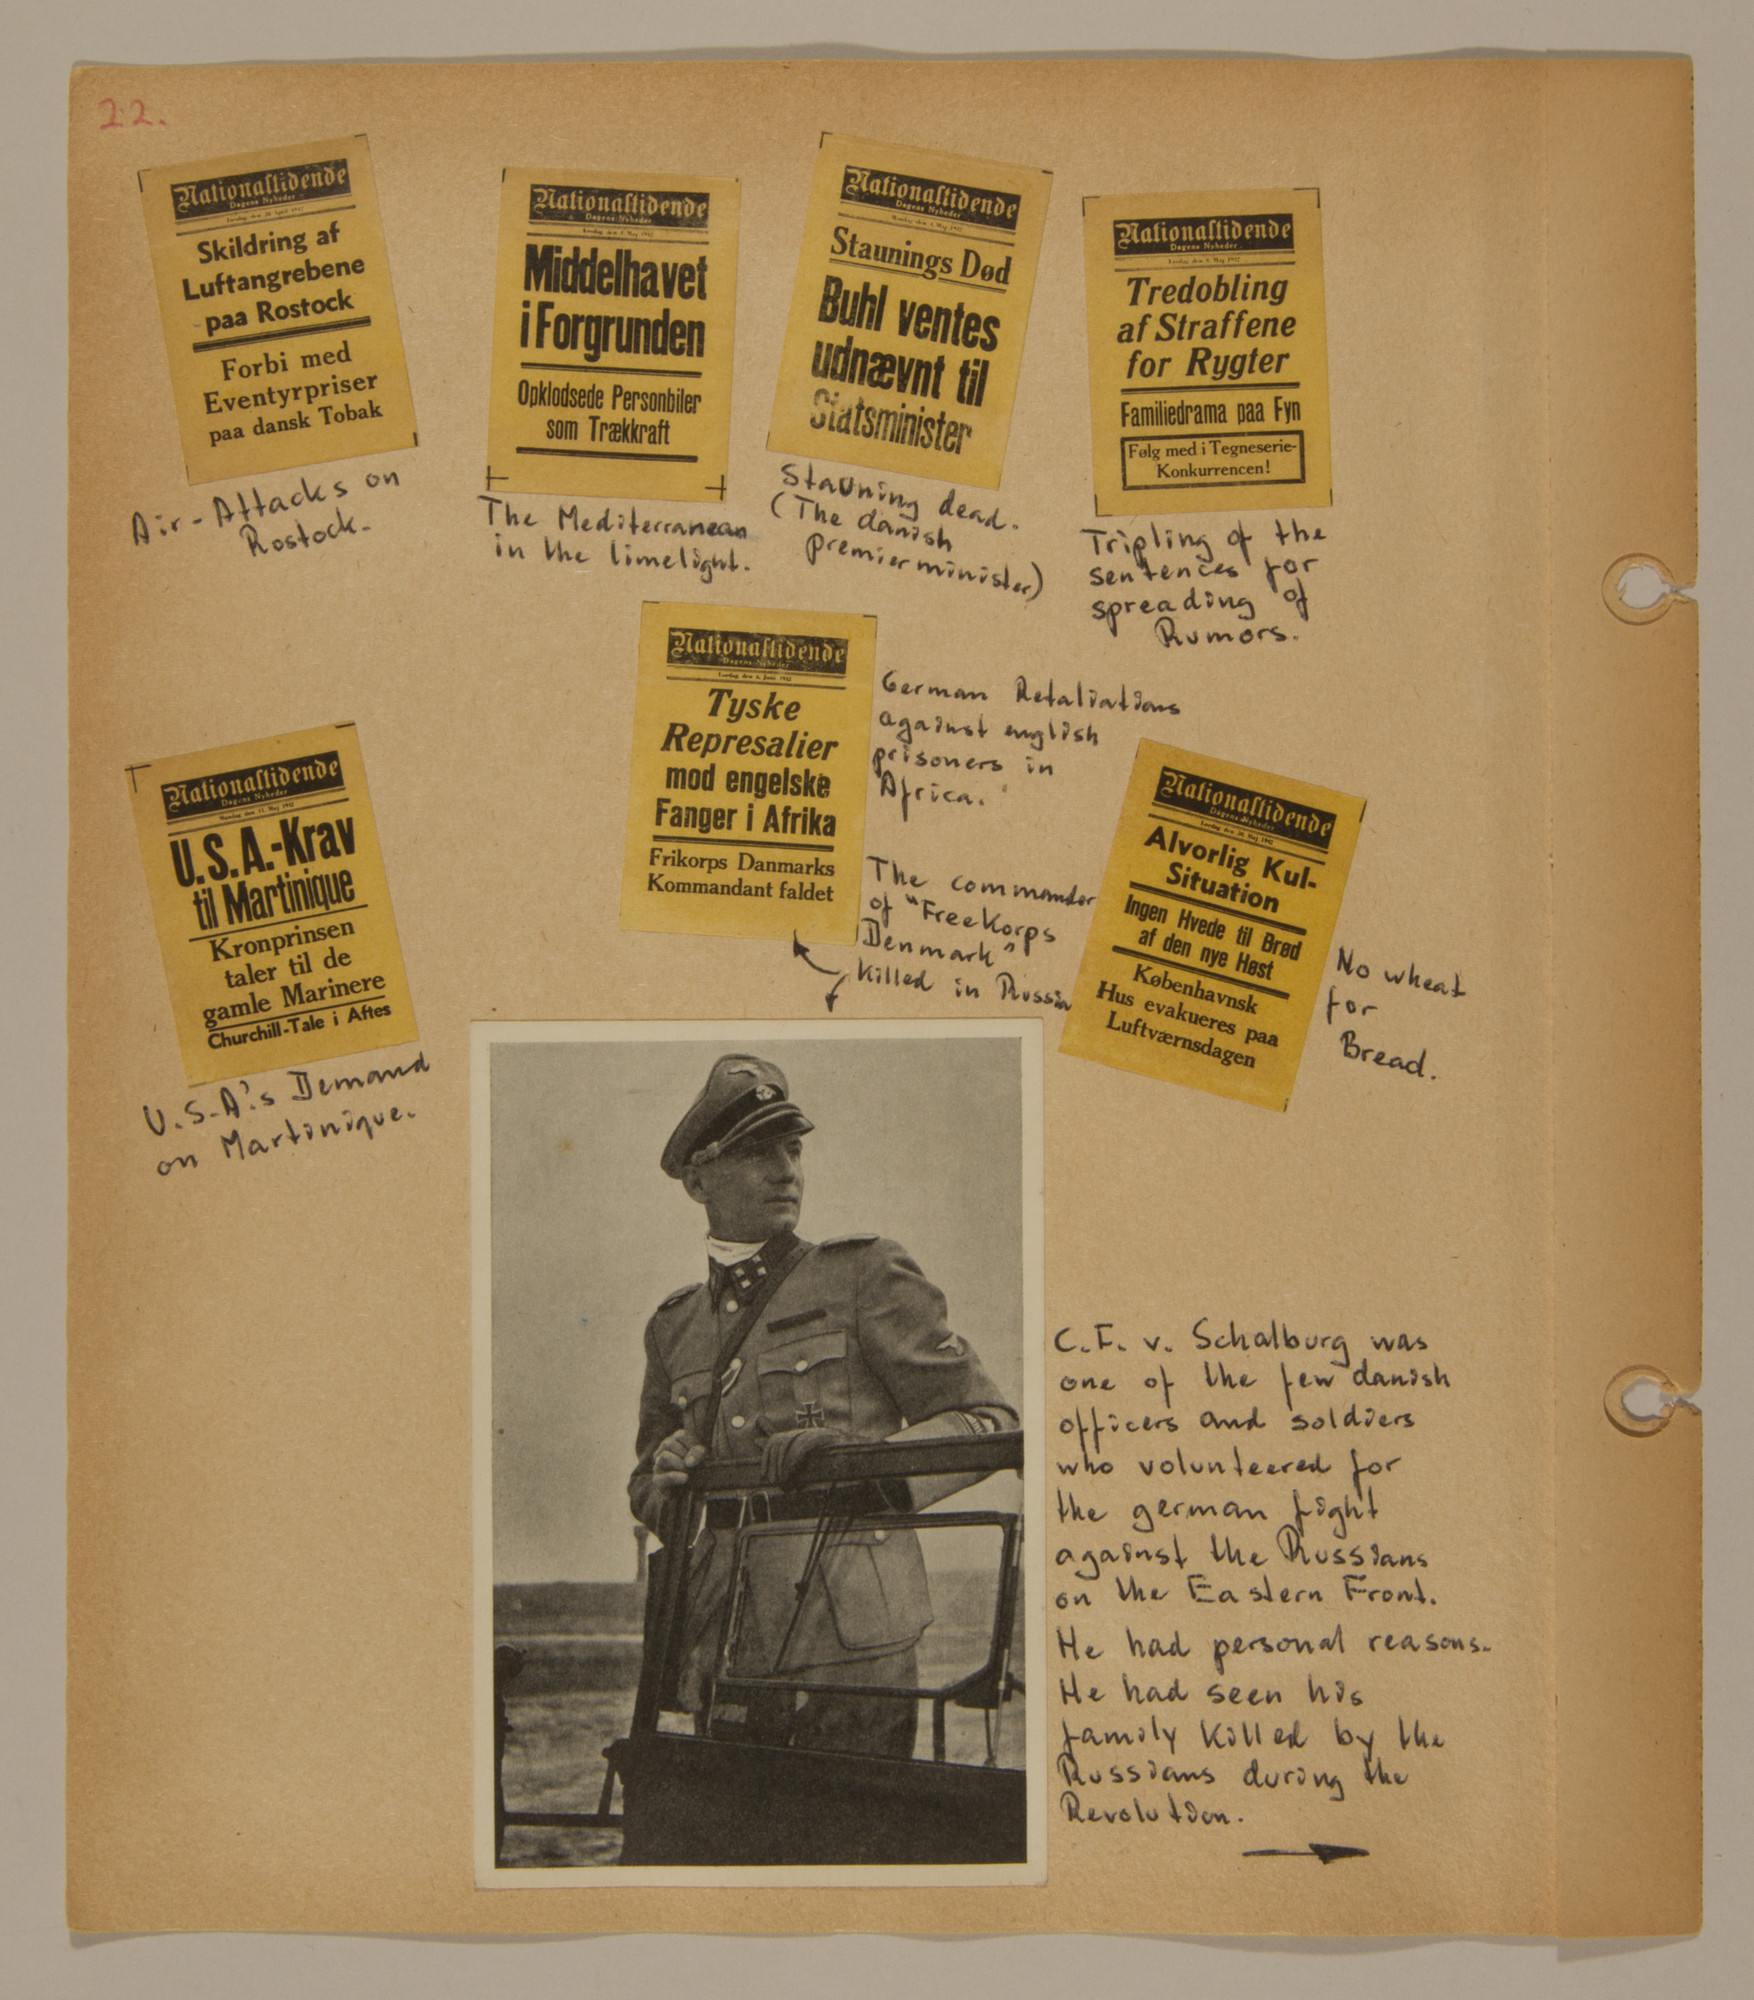 Page from volume two of a set of scrapbooks compiled by Bjorn Sibbern, a Danish policeman and resistance member, documenting the German occupation of Denmark.

This page has a photograph of a Danish collaboratorwho fought with the Germans.